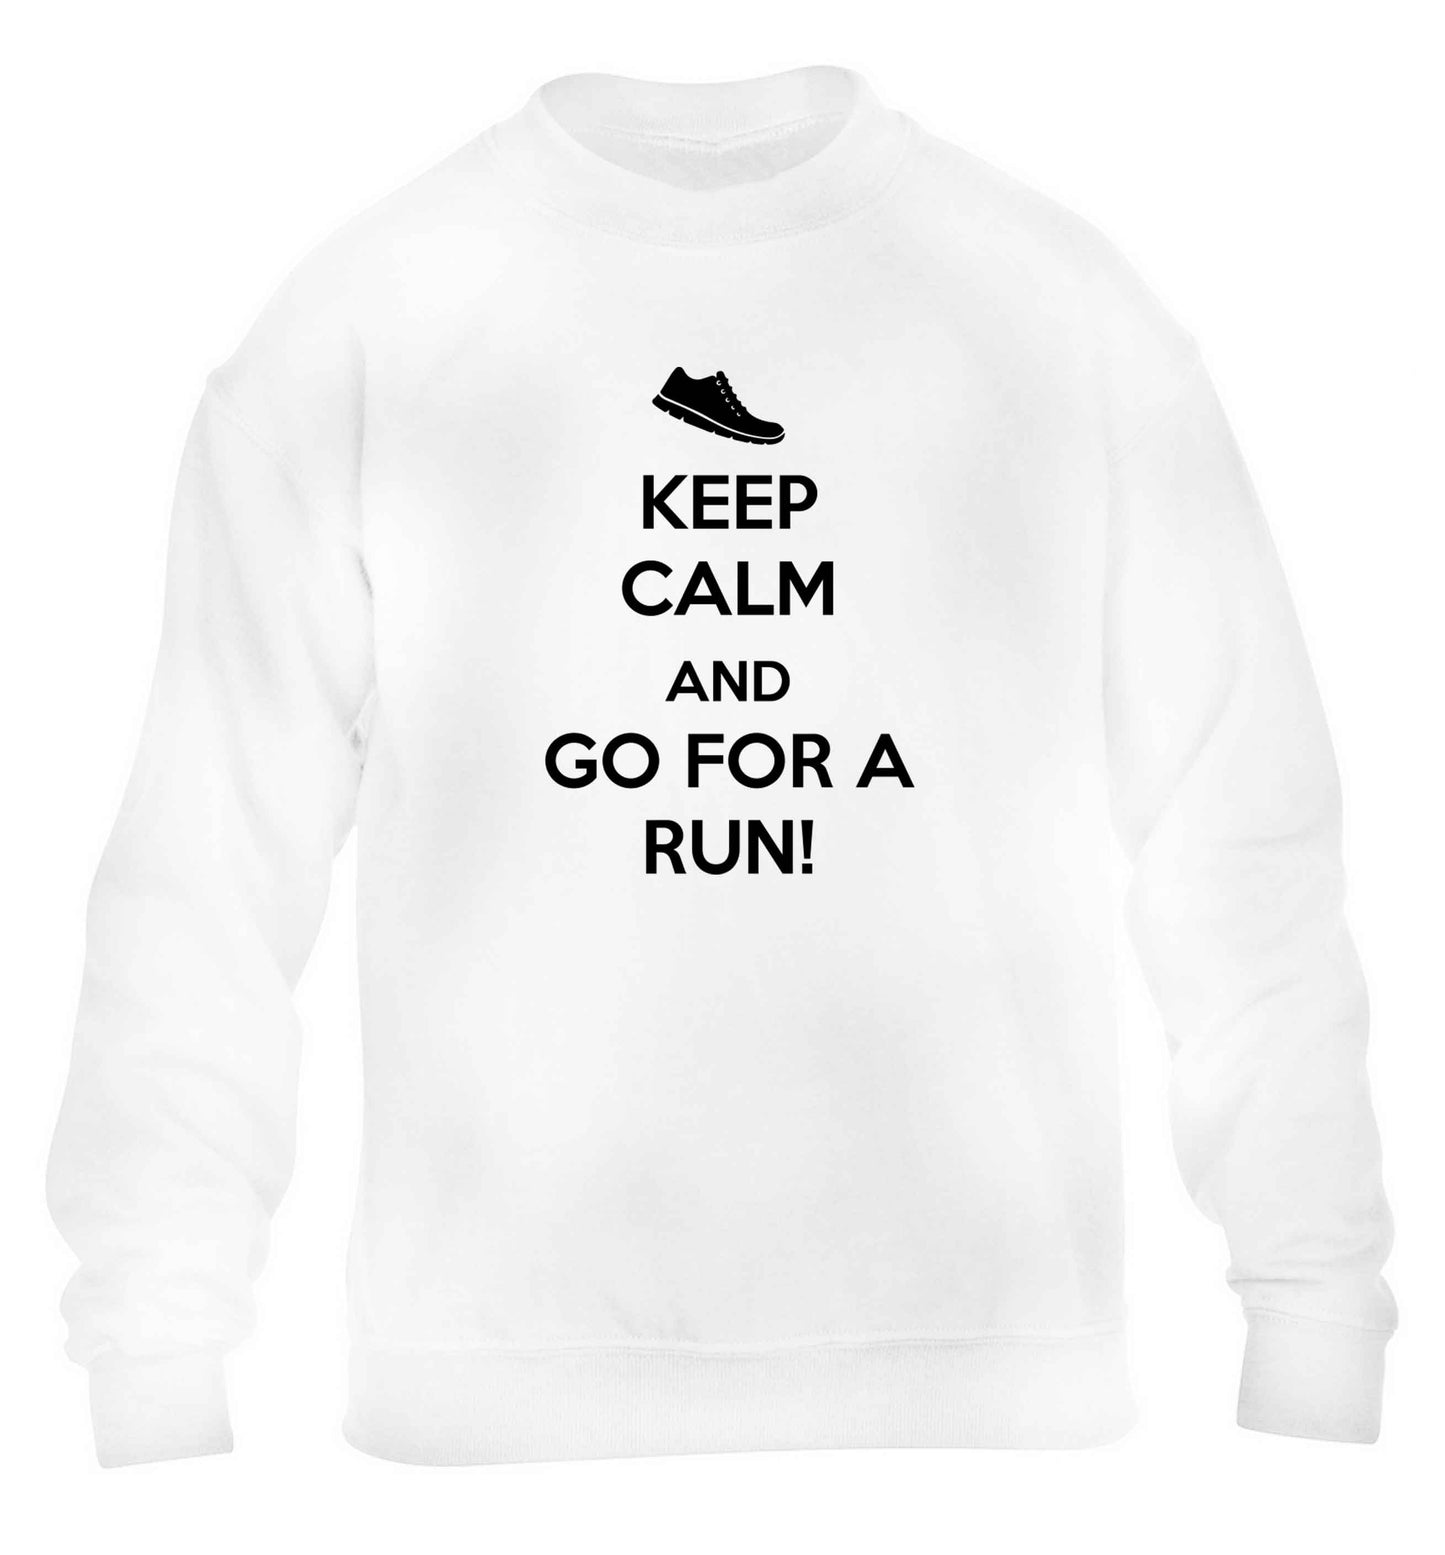 Keep calm and go for a run children's white sweater 12-13 Years